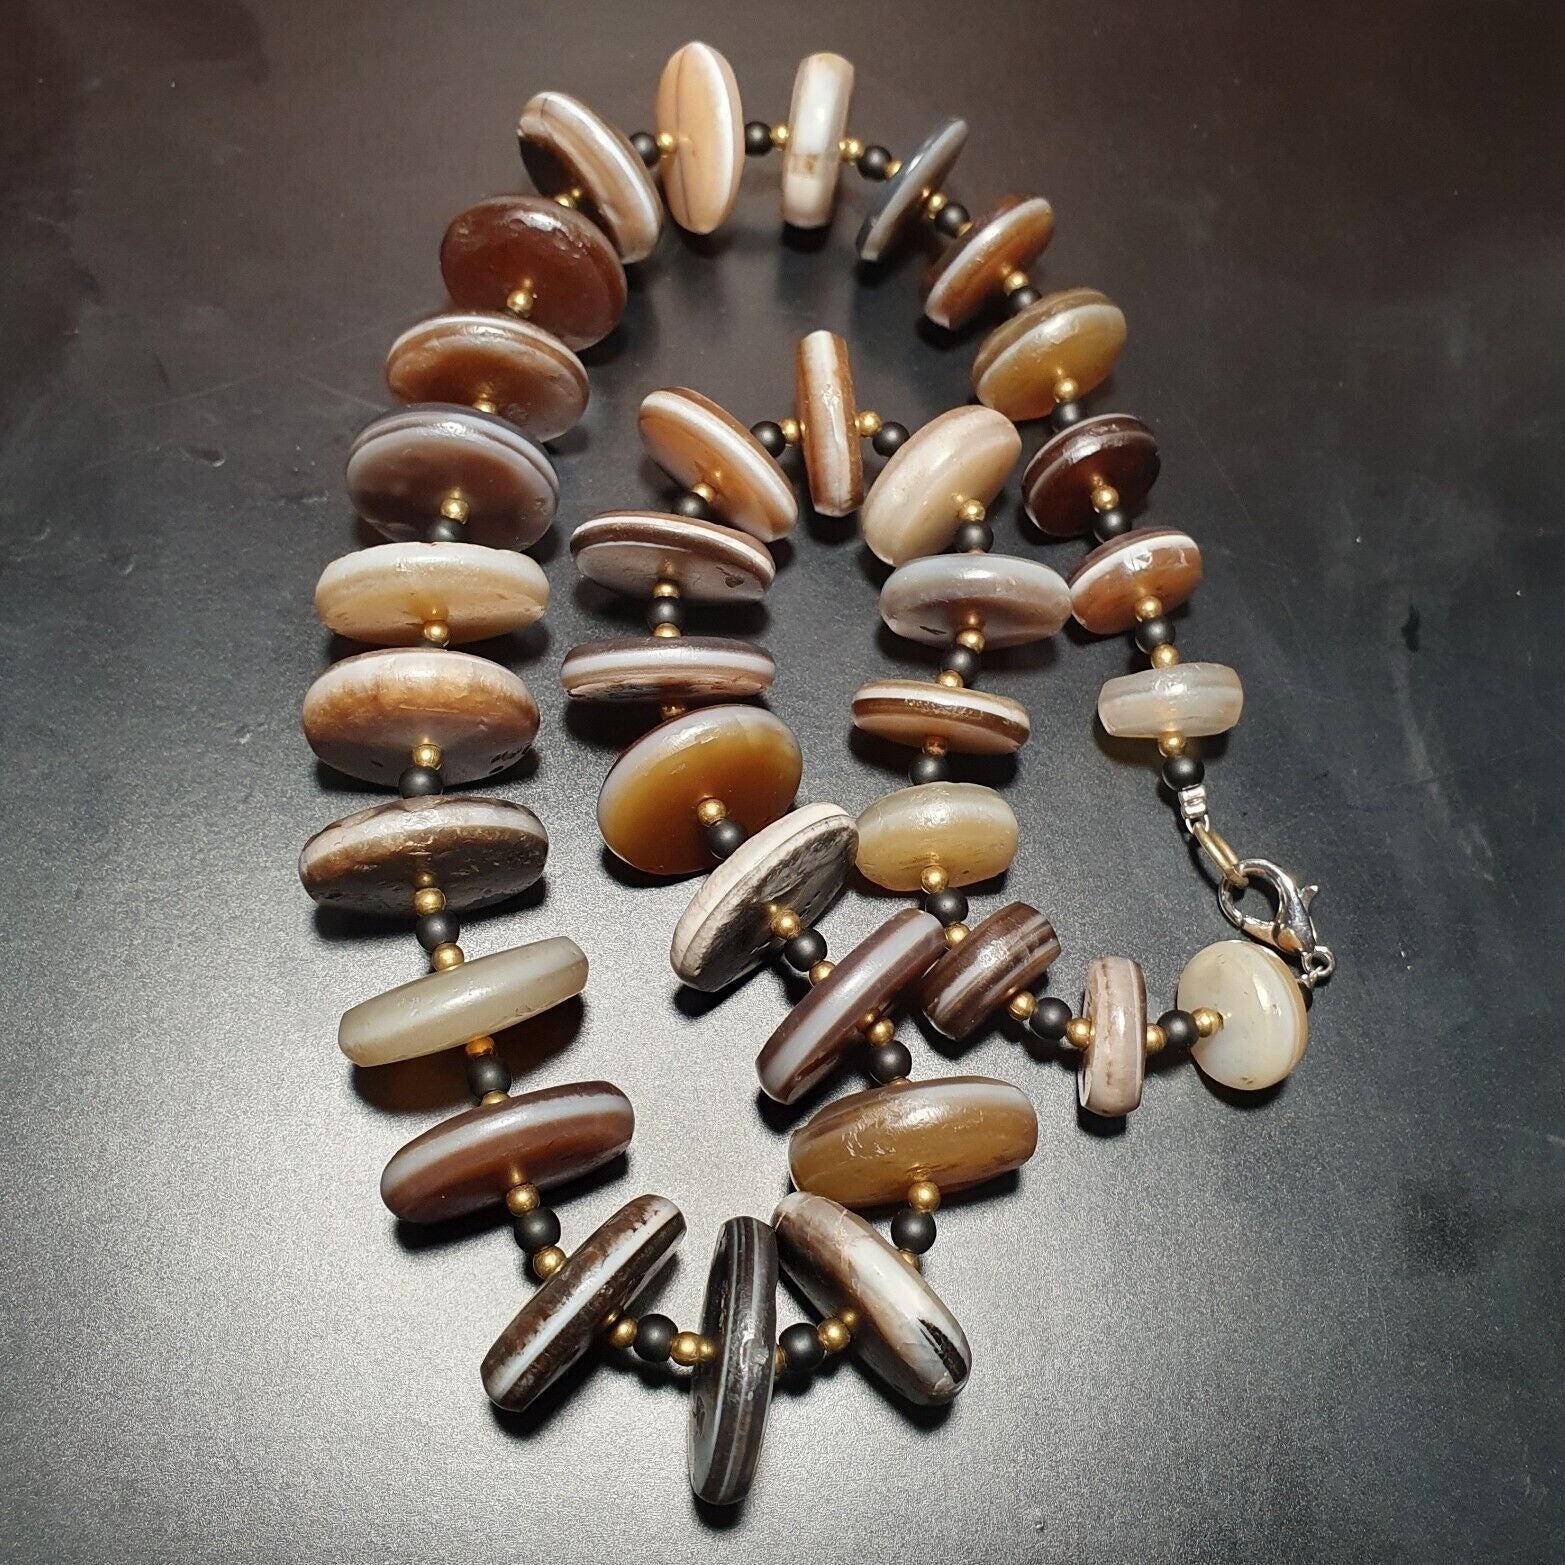 "Vintage necklace featuring a rare collection of ancient agate stone beads from the Himalayan region of India, strung together in a single line of disc-shaped beads, showcasing their natural beauty and historical significance."